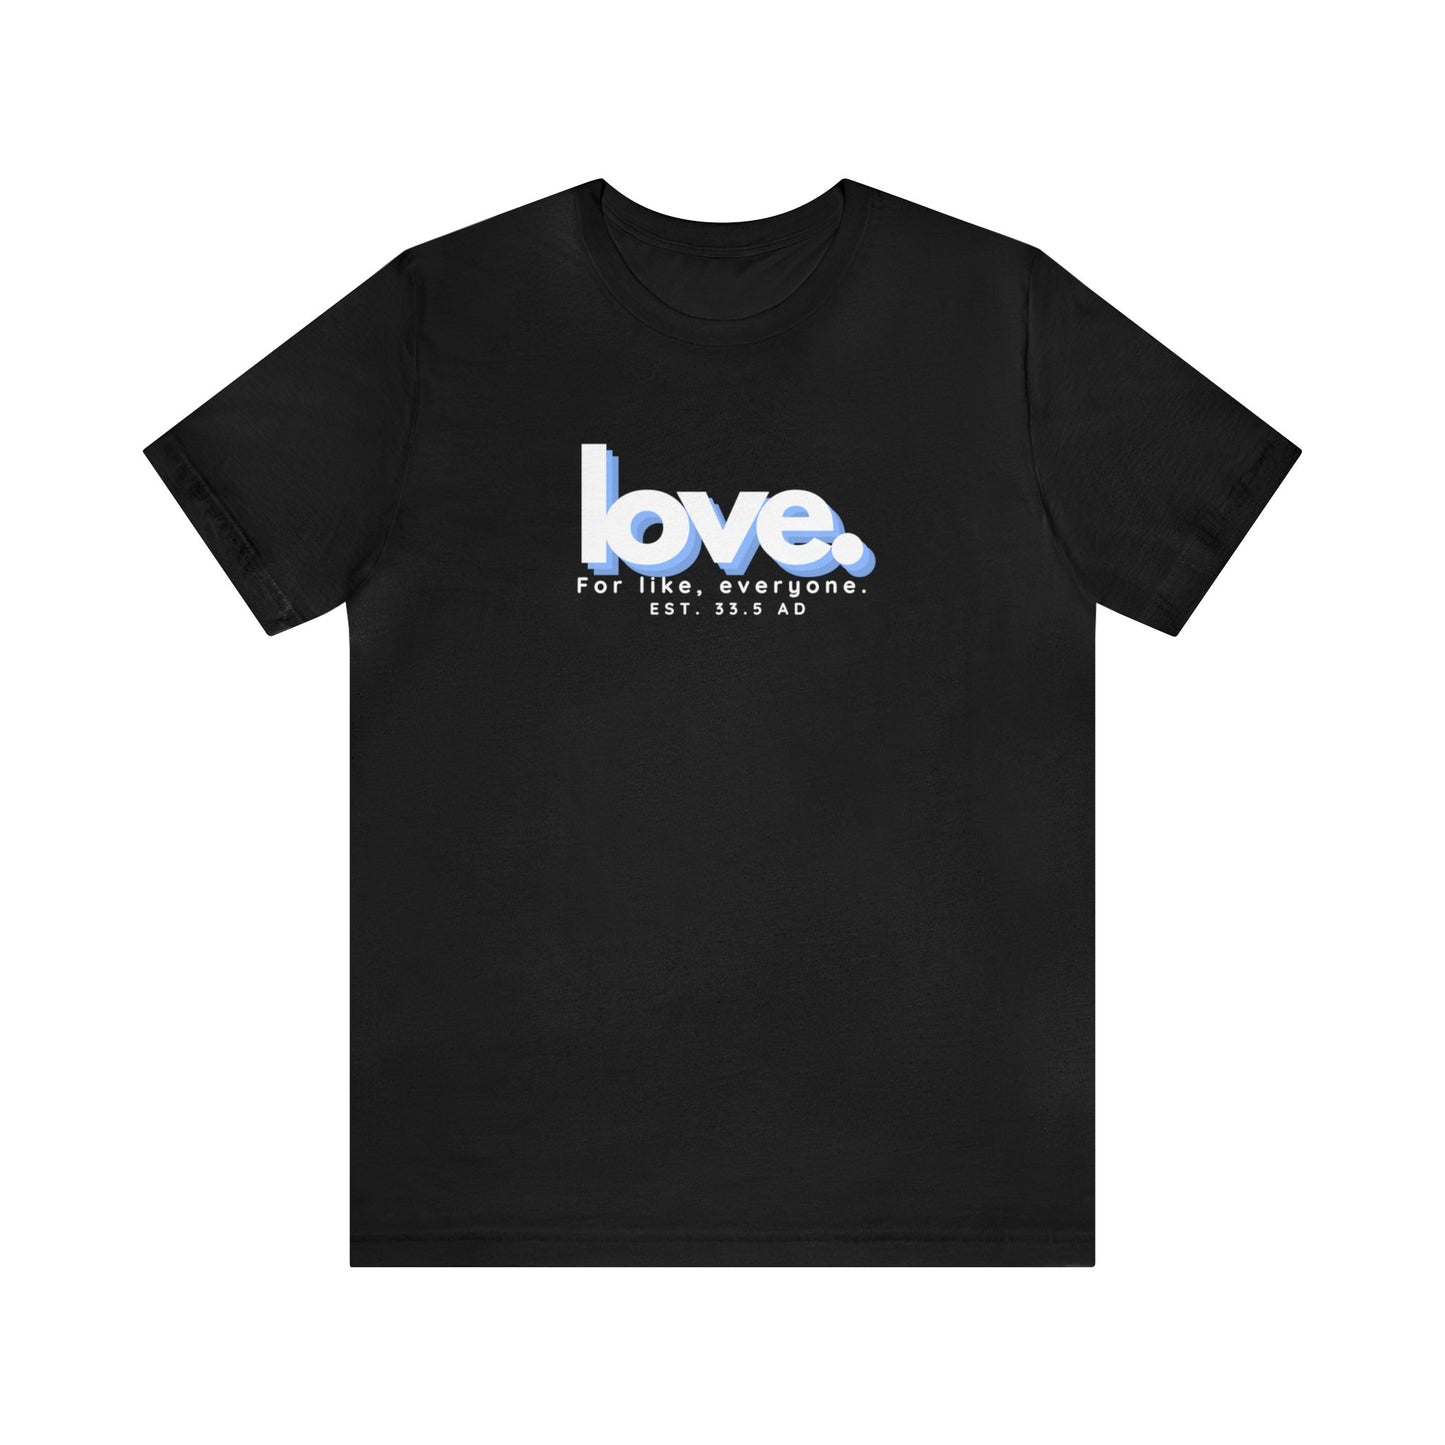 Love for everyone, Express Delivery, Christian T-shirt for Men and Women